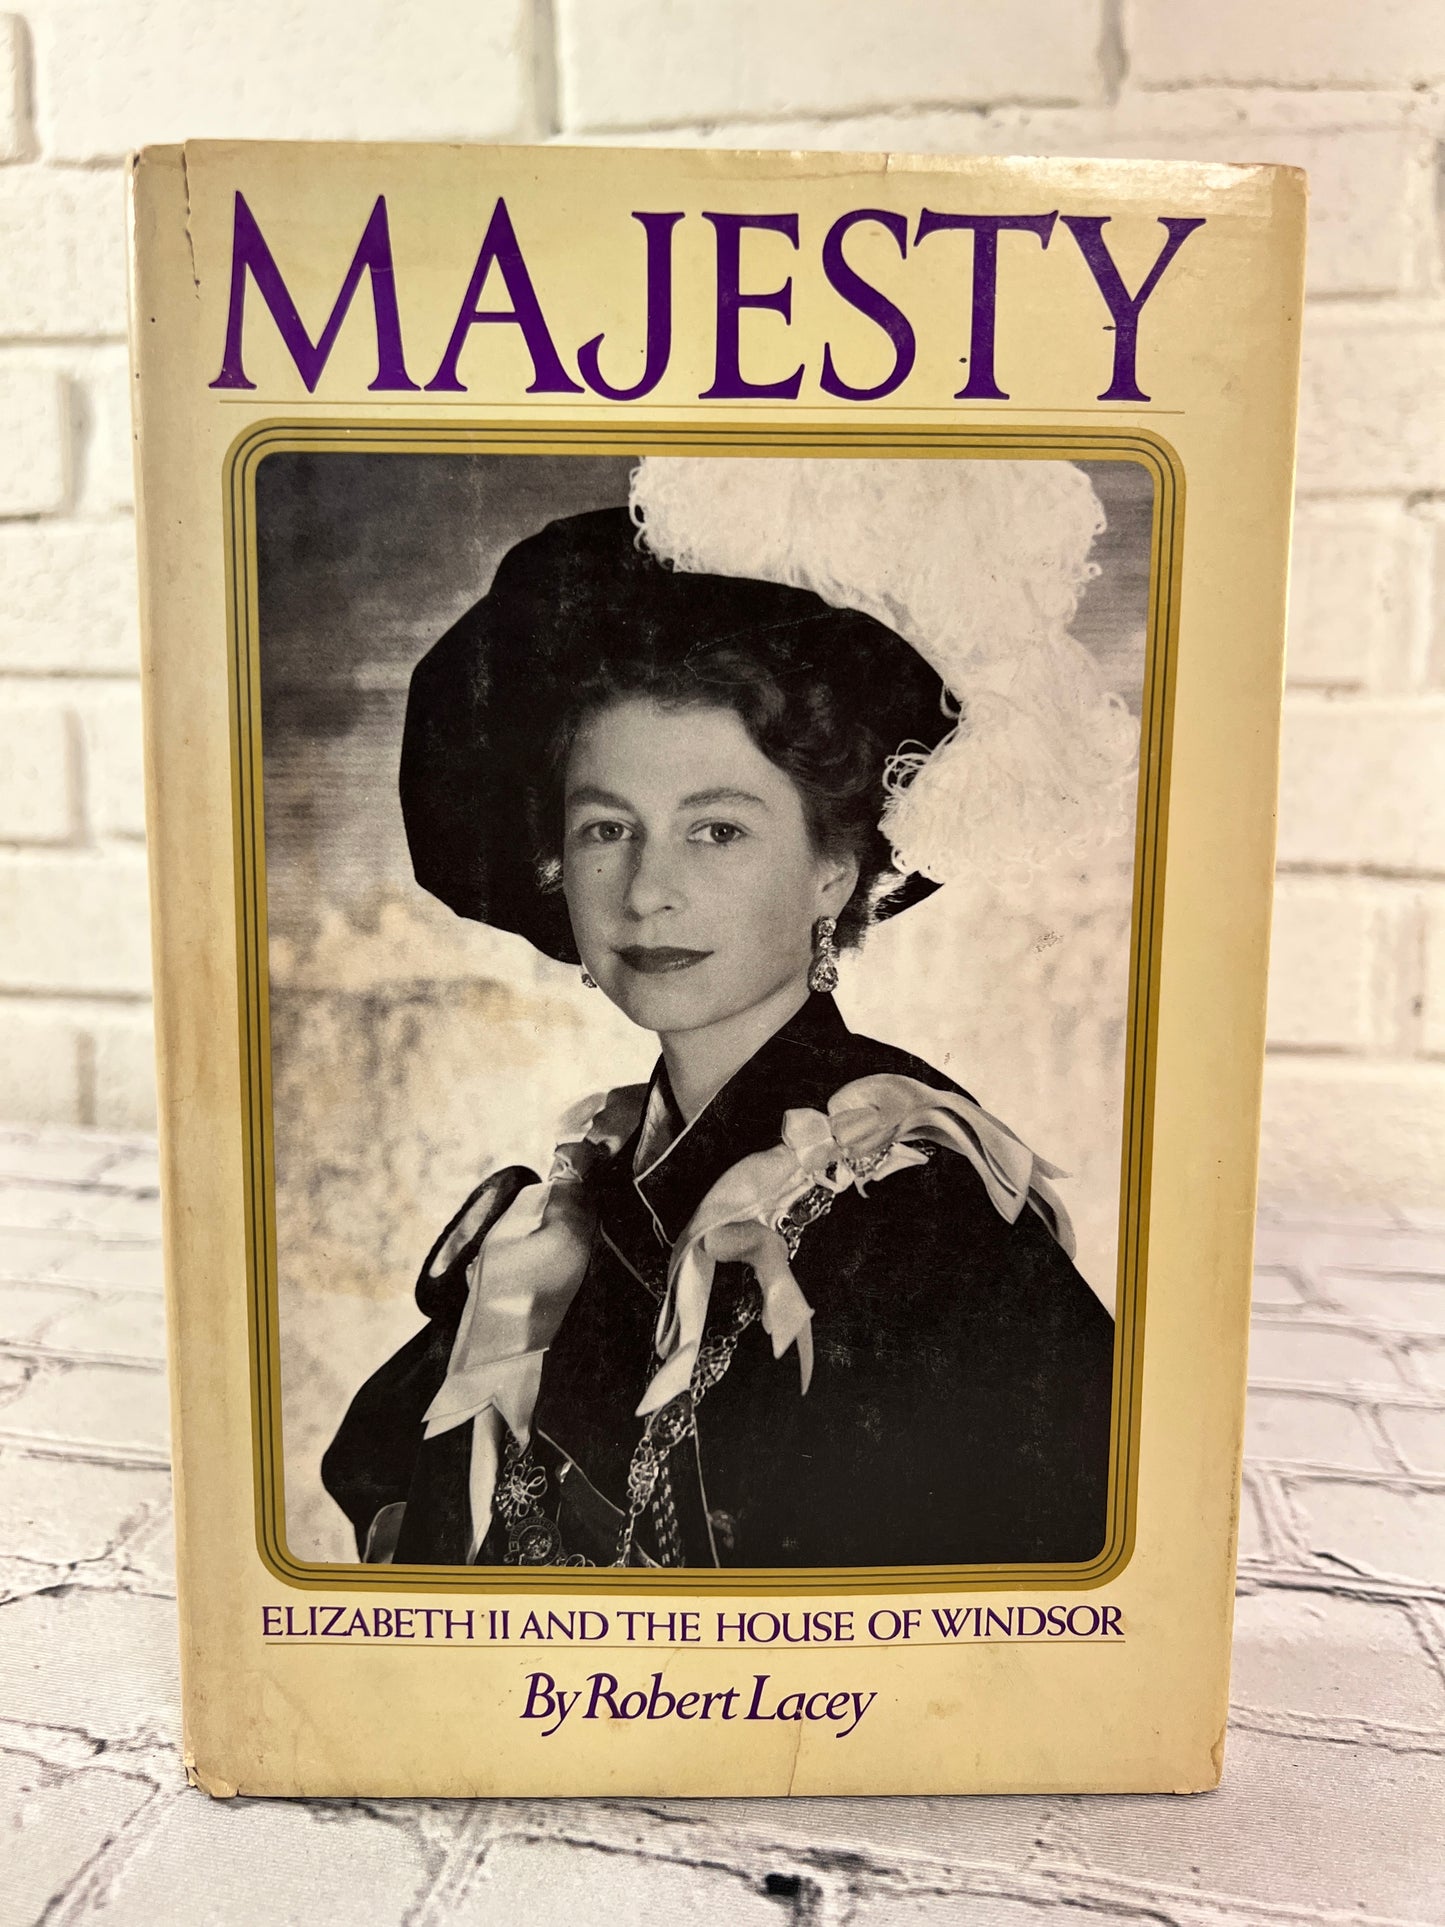 Majesty, Elizabeth II and the House of Windsor by Robert Lacey [1977]